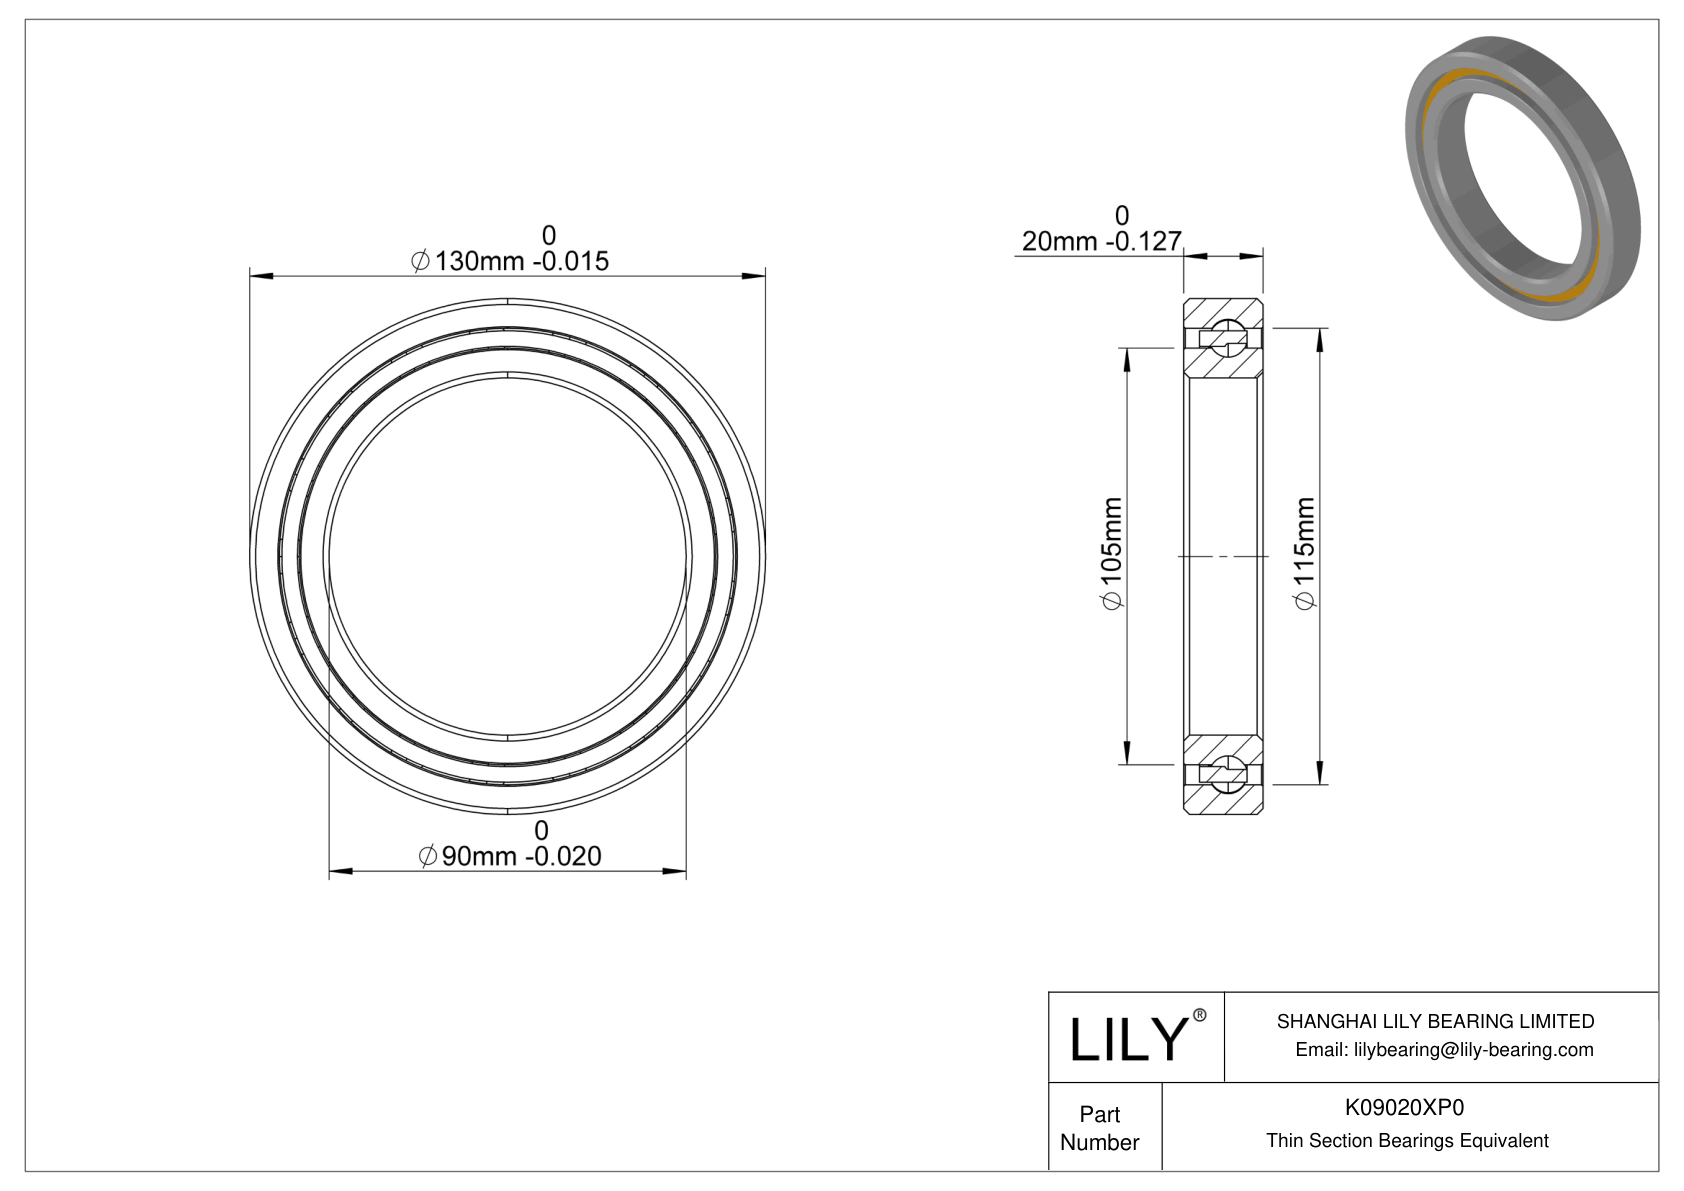 K09020XP0 Constant Section (CS) Bearings cad drawing